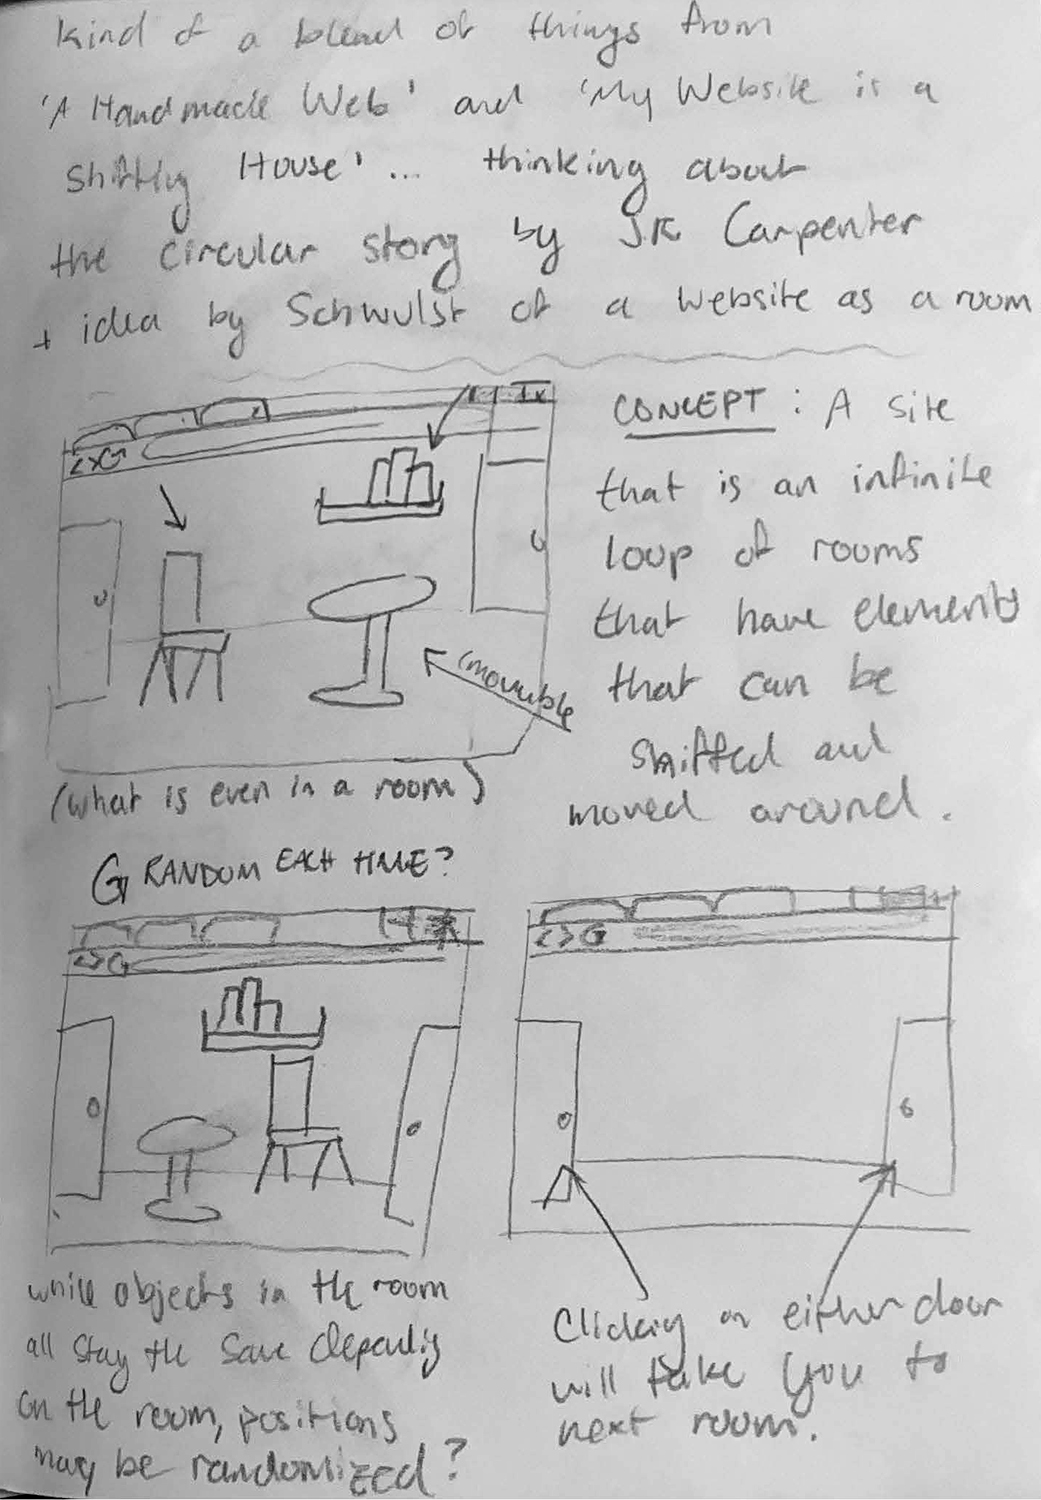 scan of reading response with small sketches depicting website concept of a room